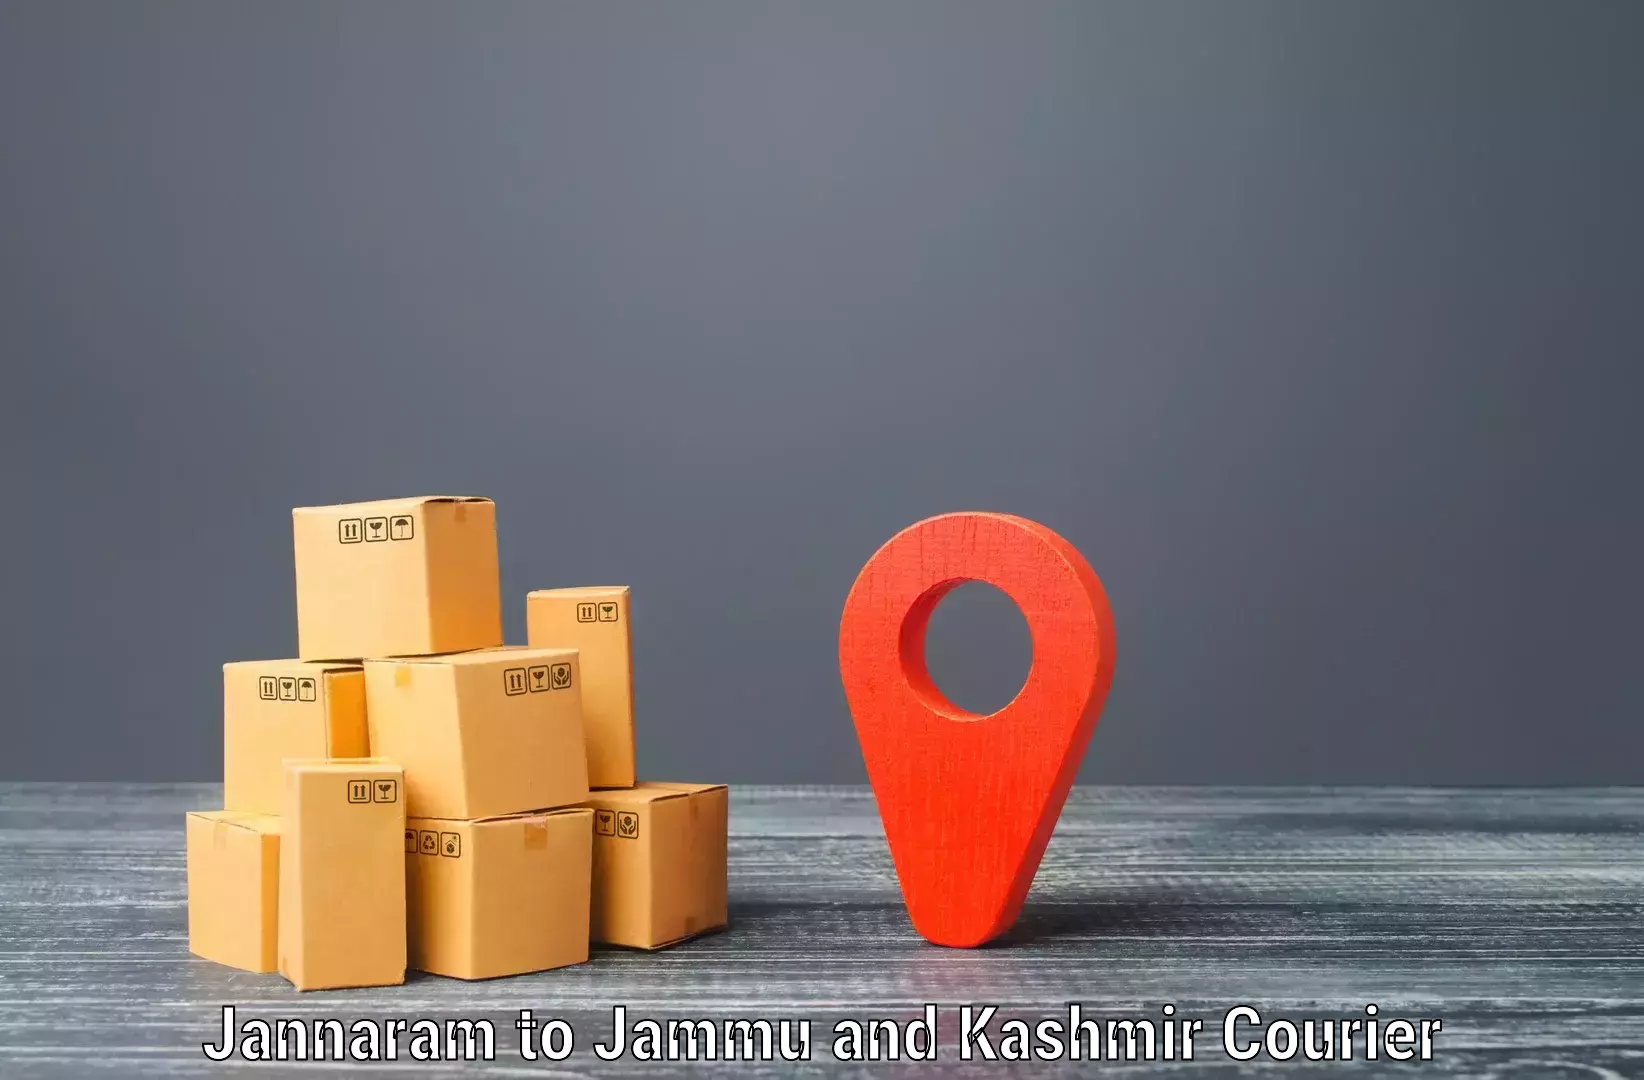 Air courier services in Jannaram to Anantnag